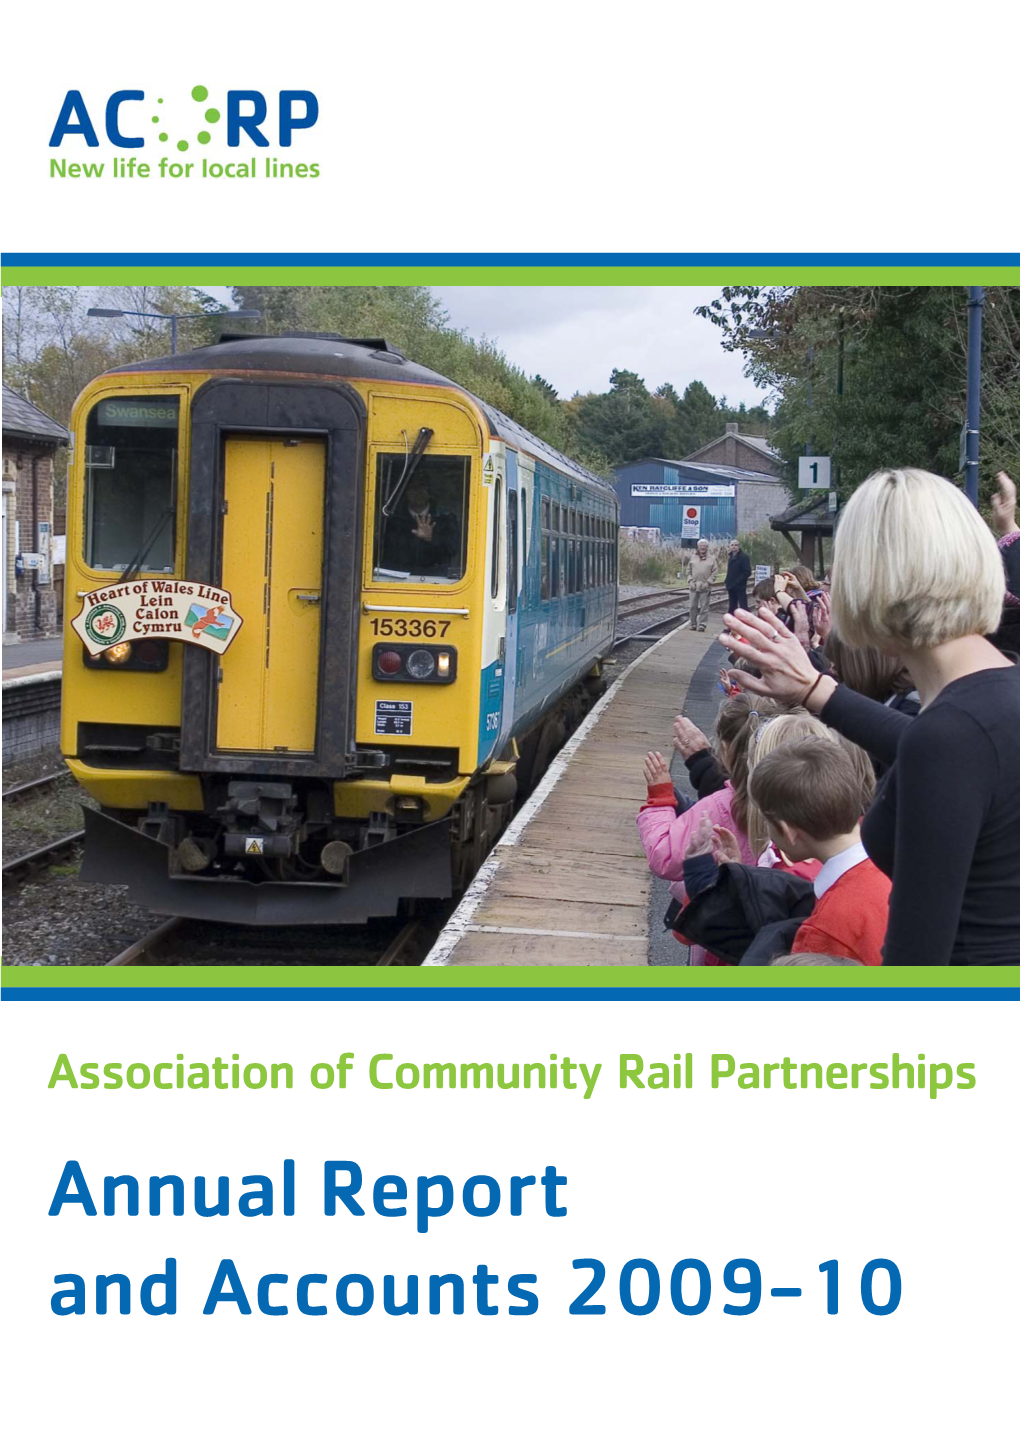 Annual Report and Accounts 2009-10